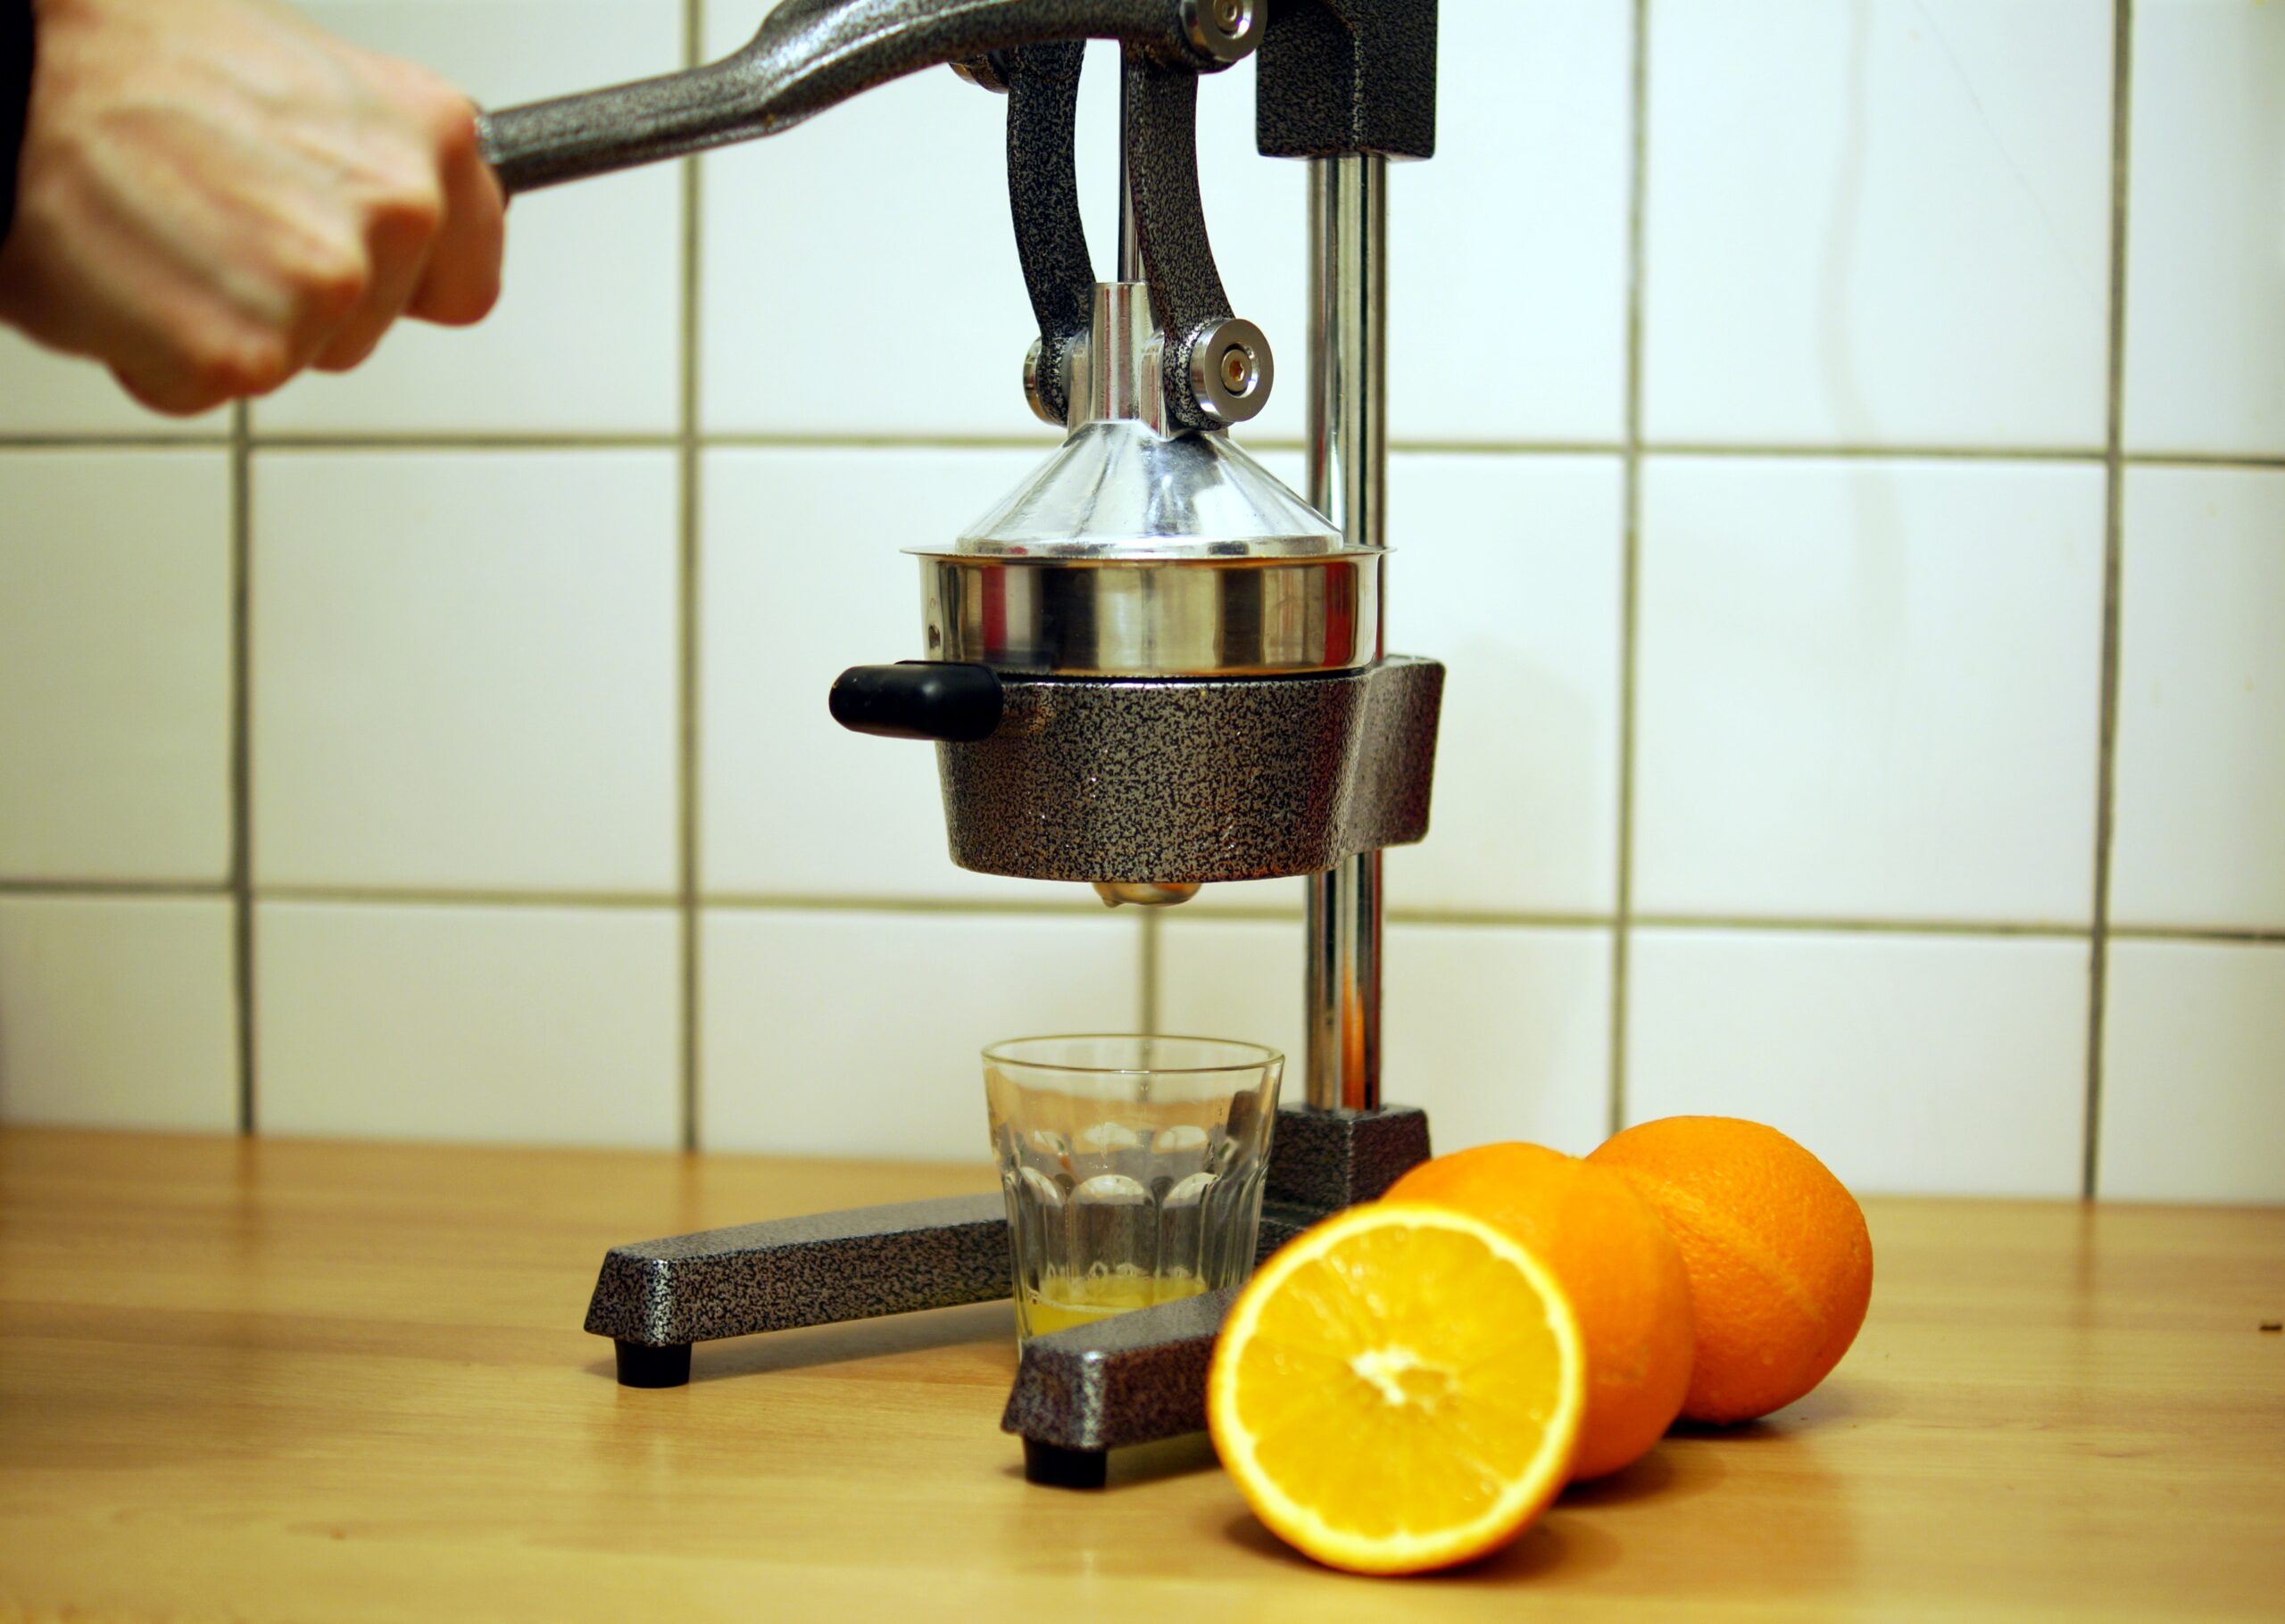 A juicer with a glass of orange juice